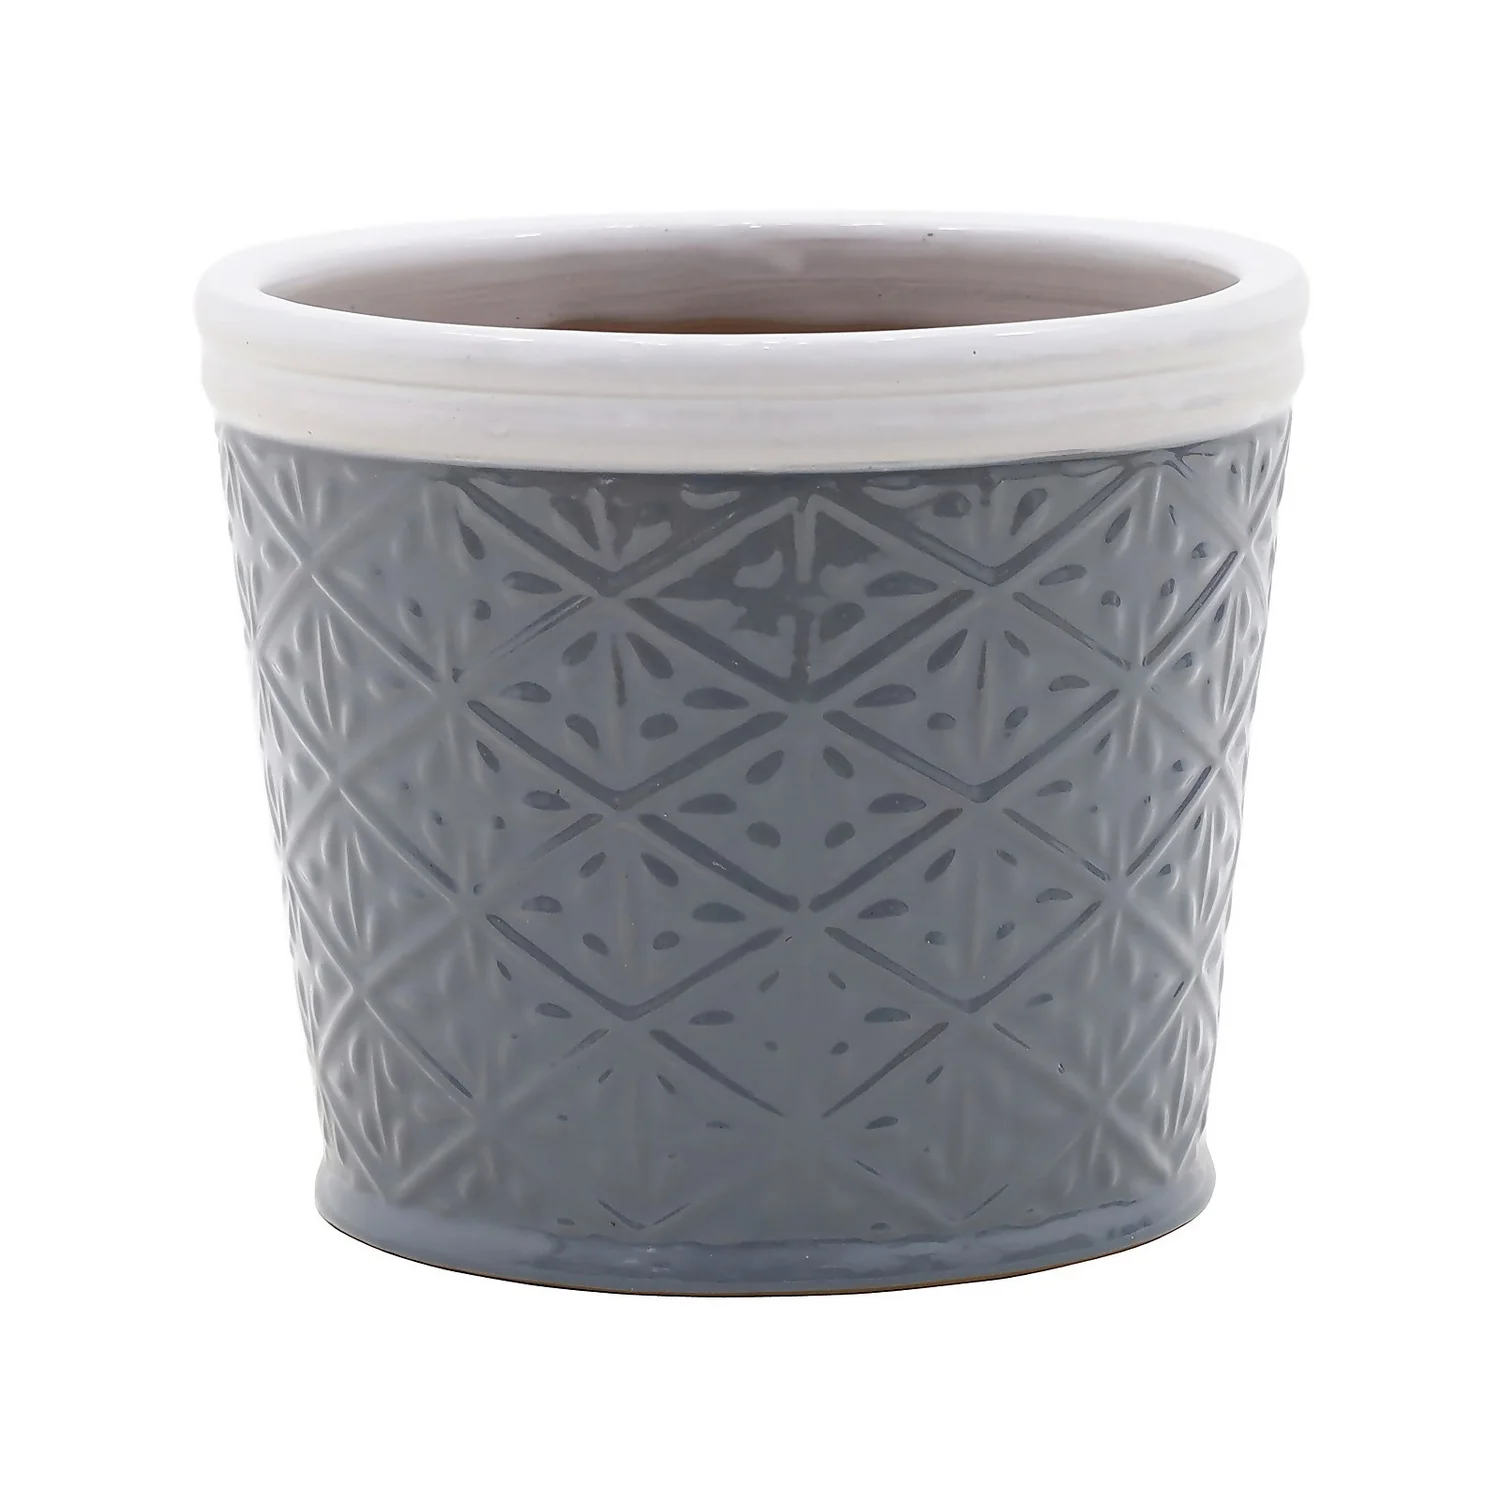 Image of Save &pound9.50: 25cm Country Living Heritage Pot  